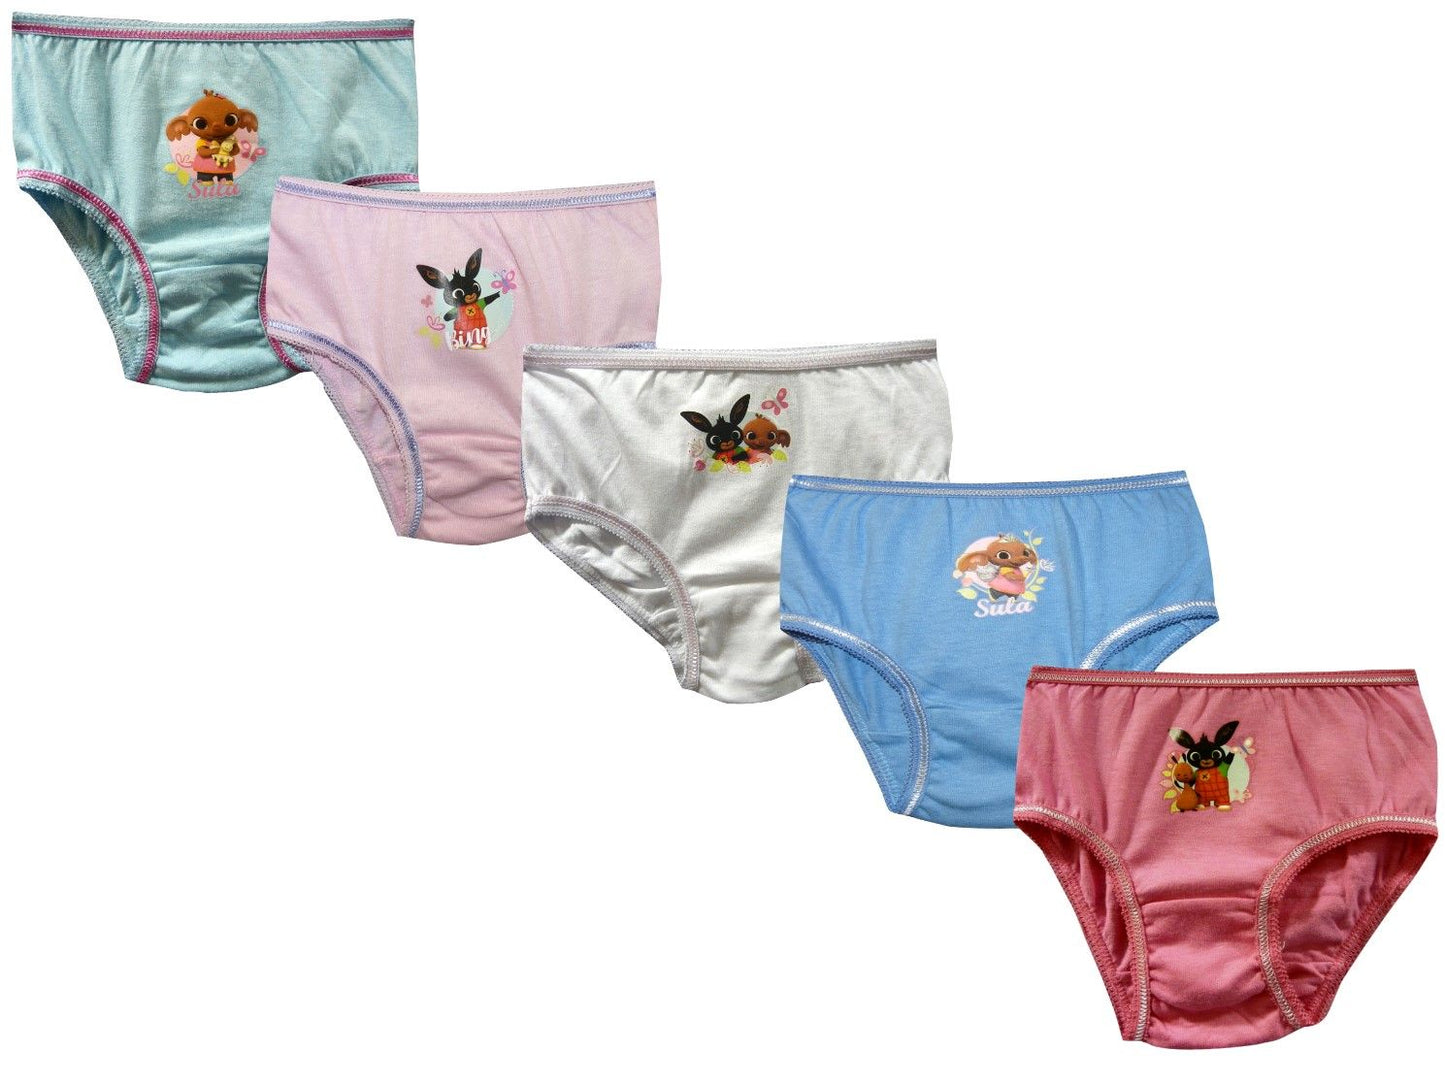 Bing Girls Knickers "Characters" 5 pack 100% Cotton